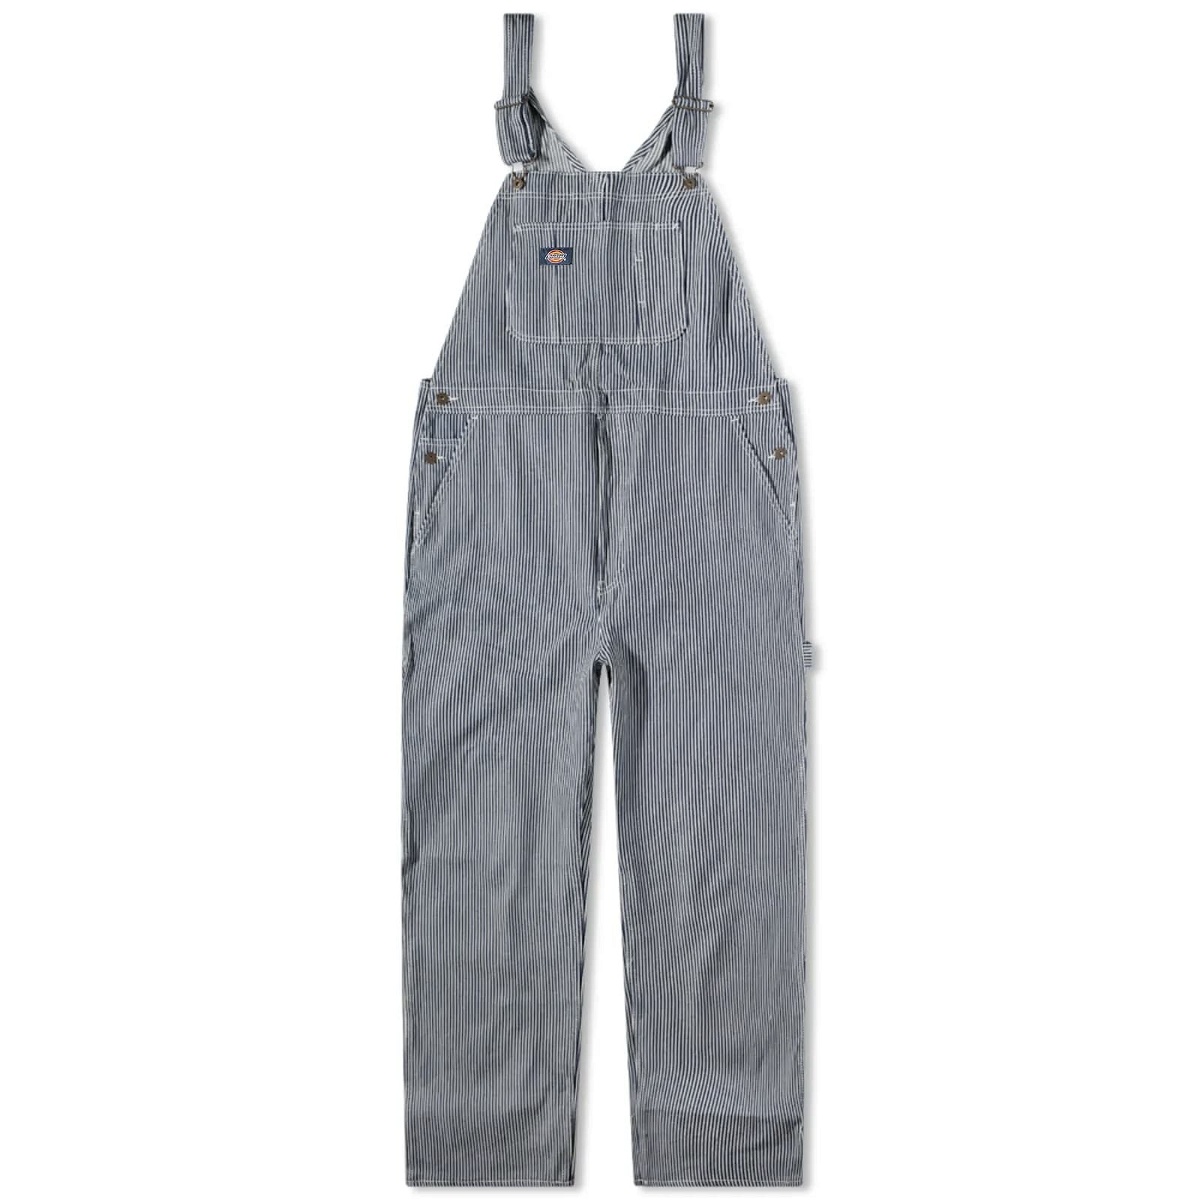 Dickies Men's Classic Hickory Bib Overall in Air Force Blue Dickies ...